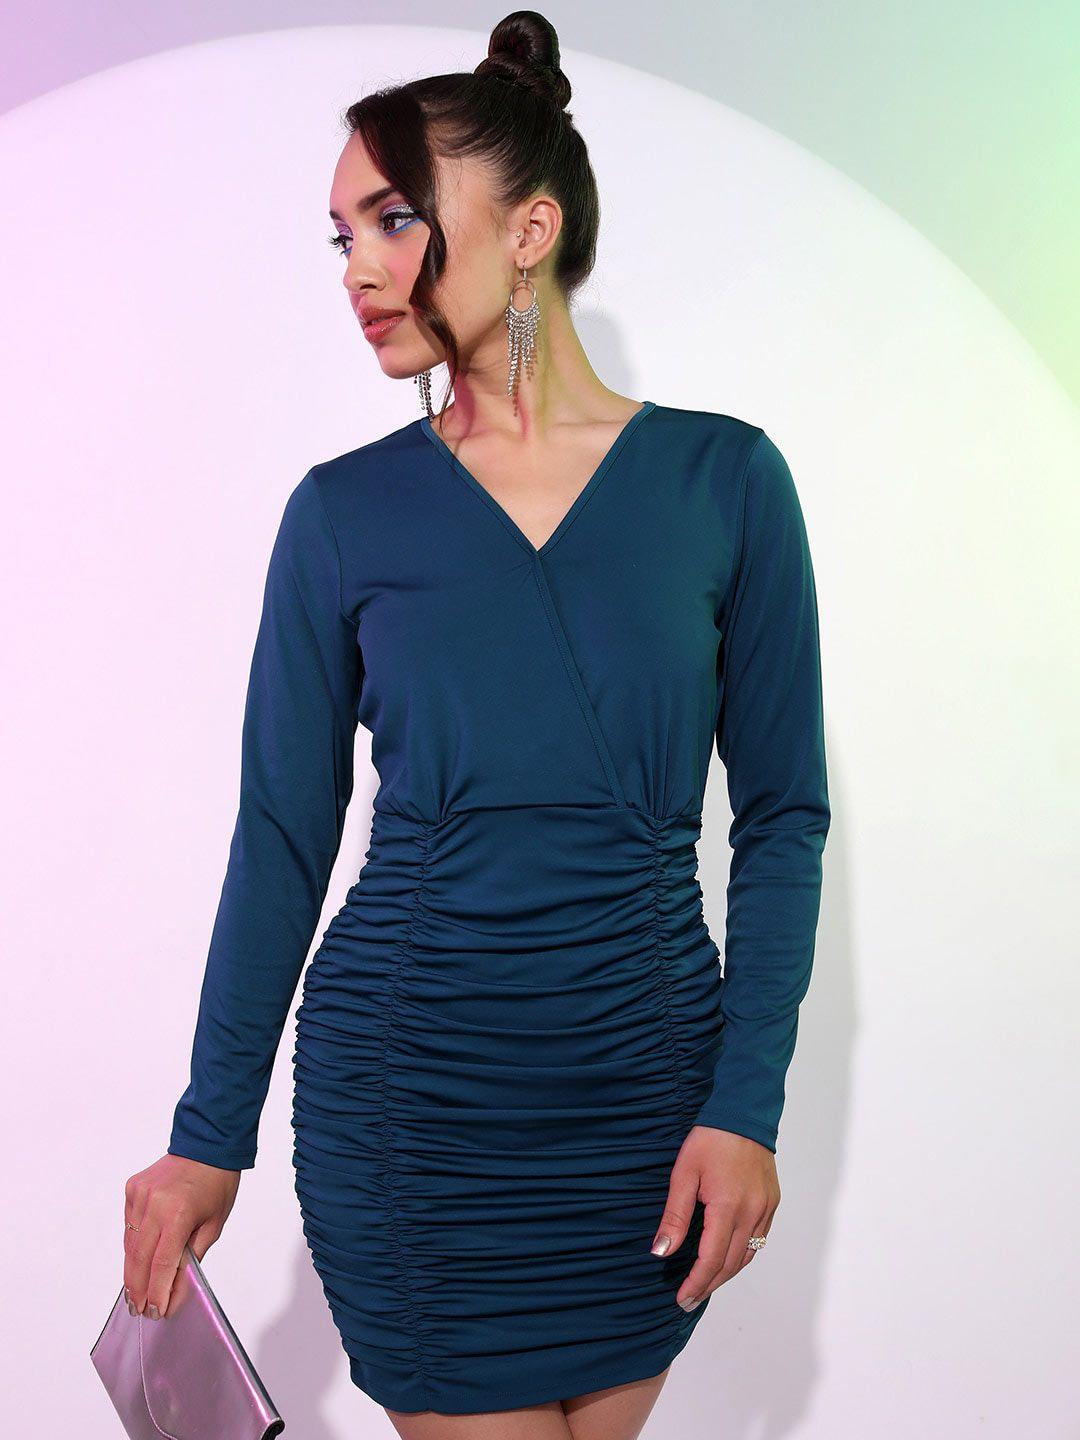 tokyo talkies teal v-neck ruched bodycon dress